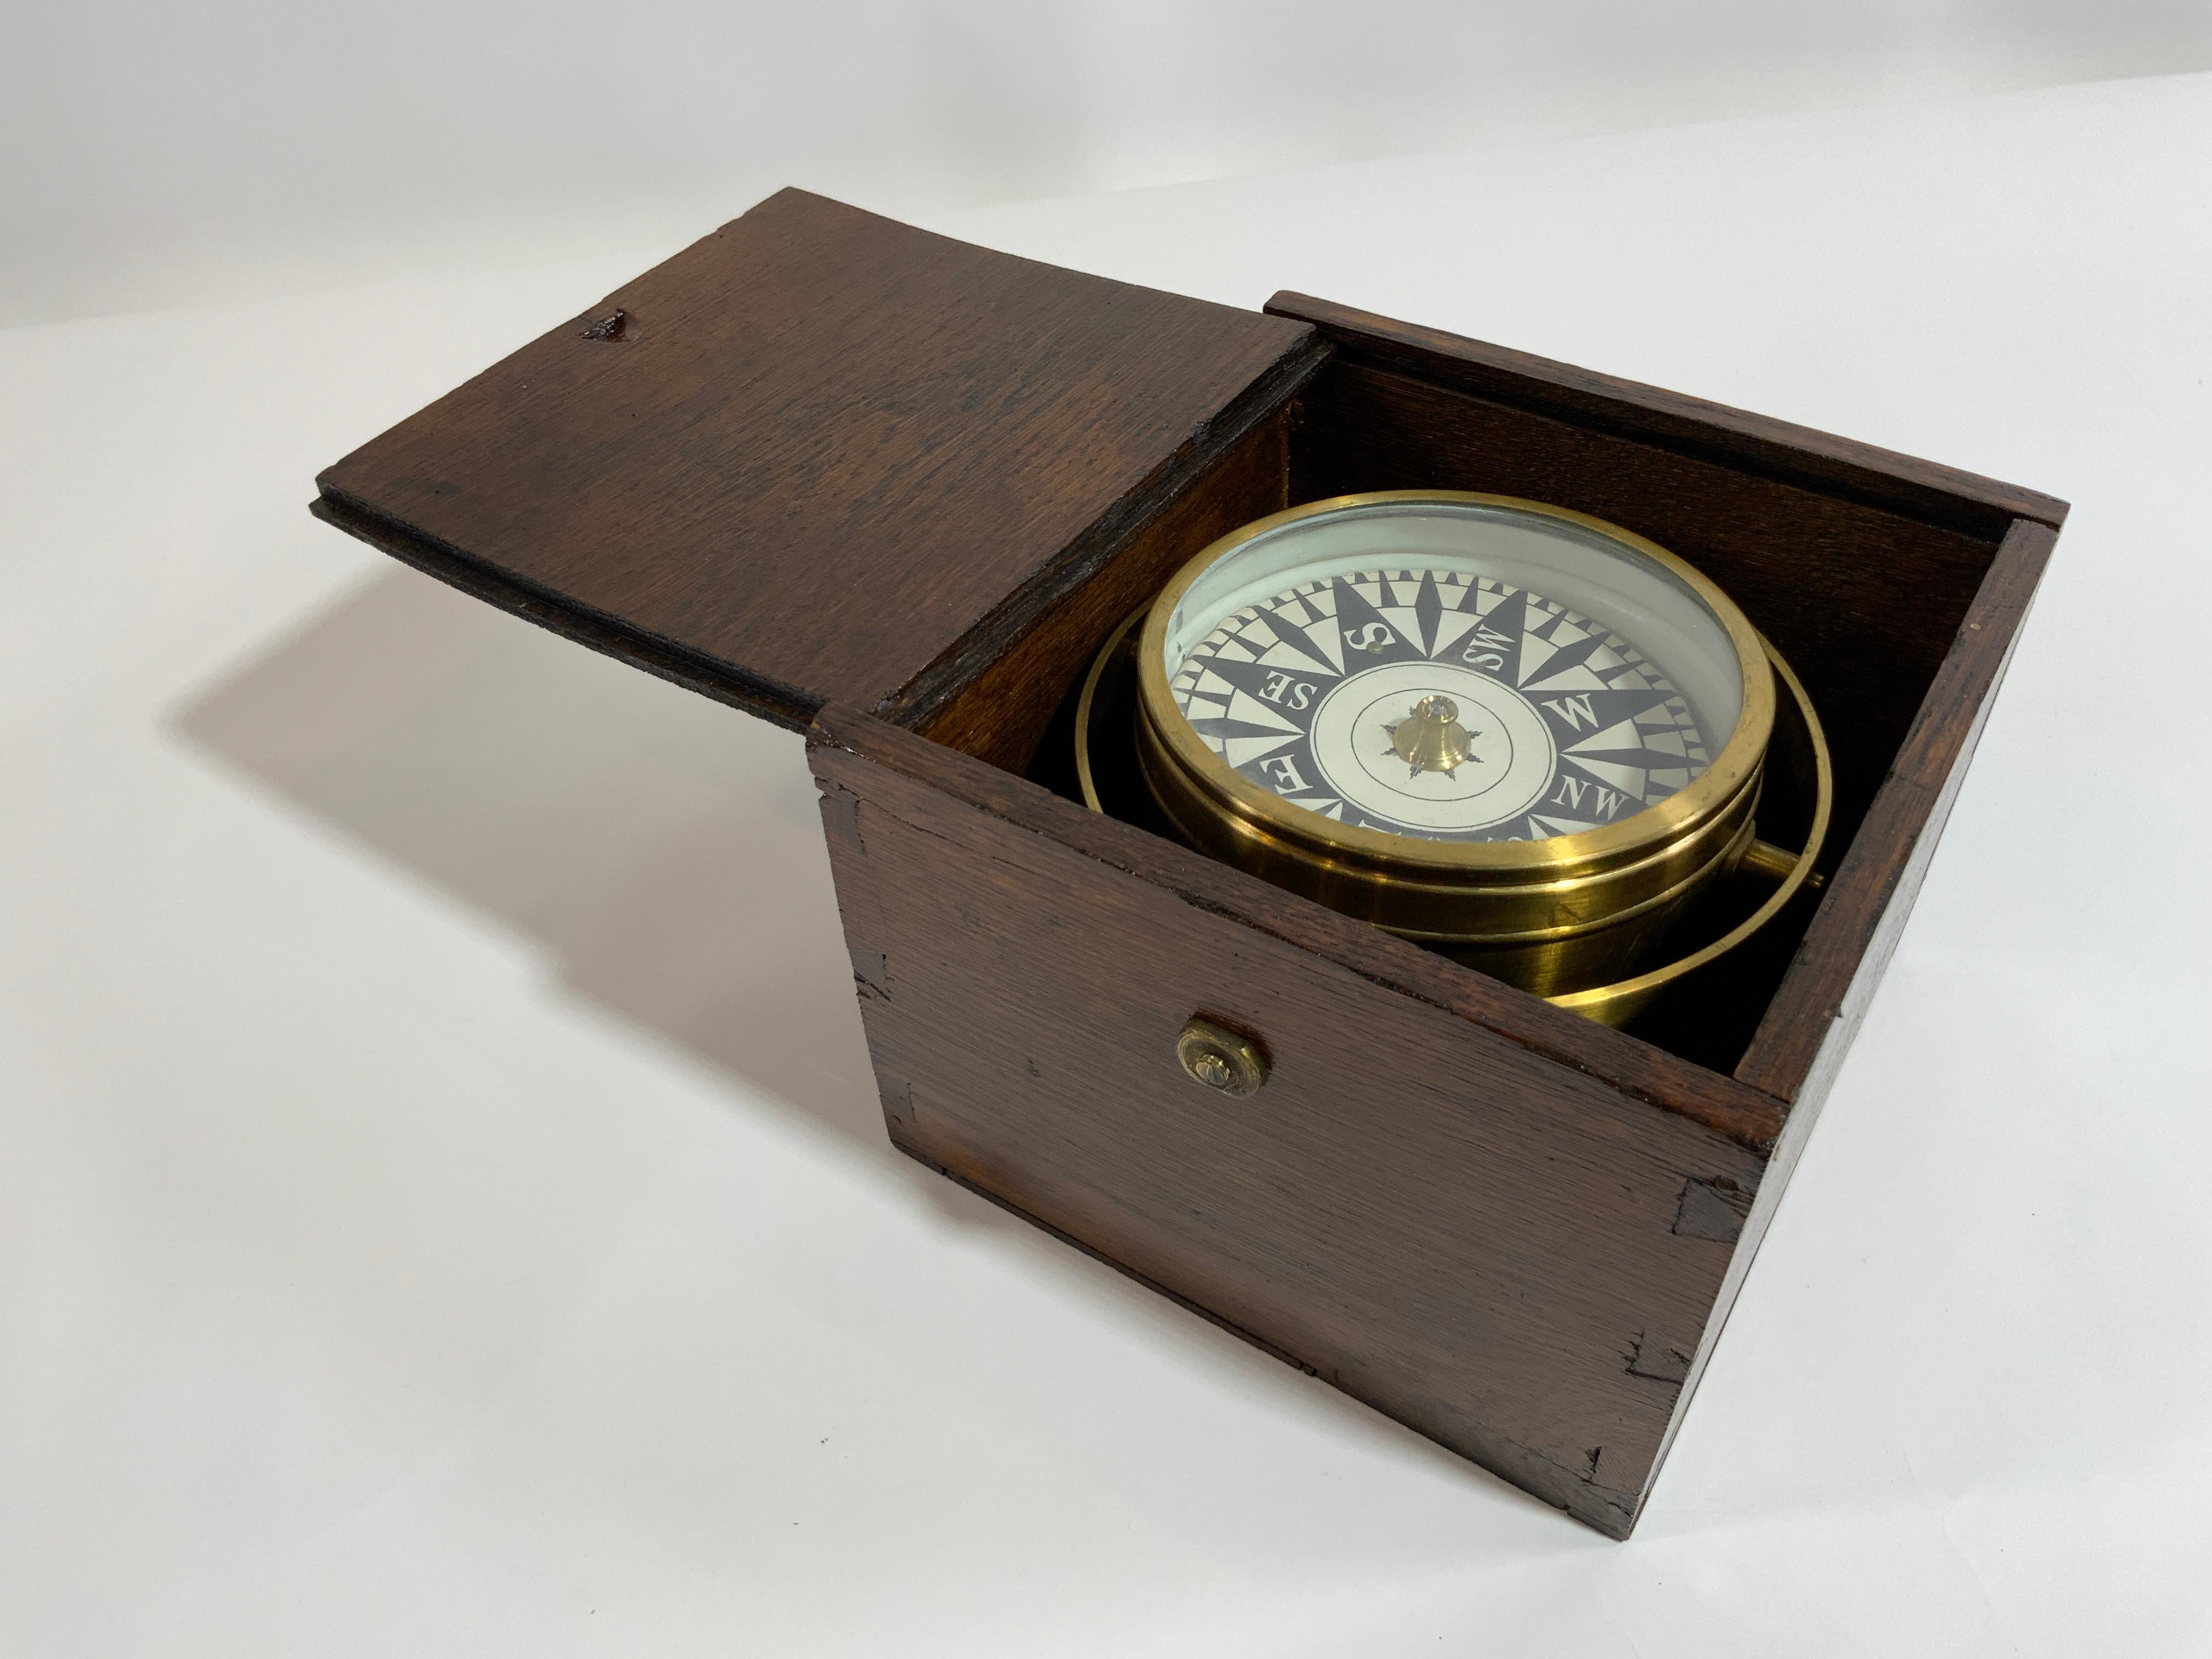 Late nineteenth century ships compass with gimbal mounted into a varnished wood box. Compass card in very nice condition and marked with a large fleur-de-lis pointing north. Spun brass bowl. Circa 1880.

Overall dimensions: 6